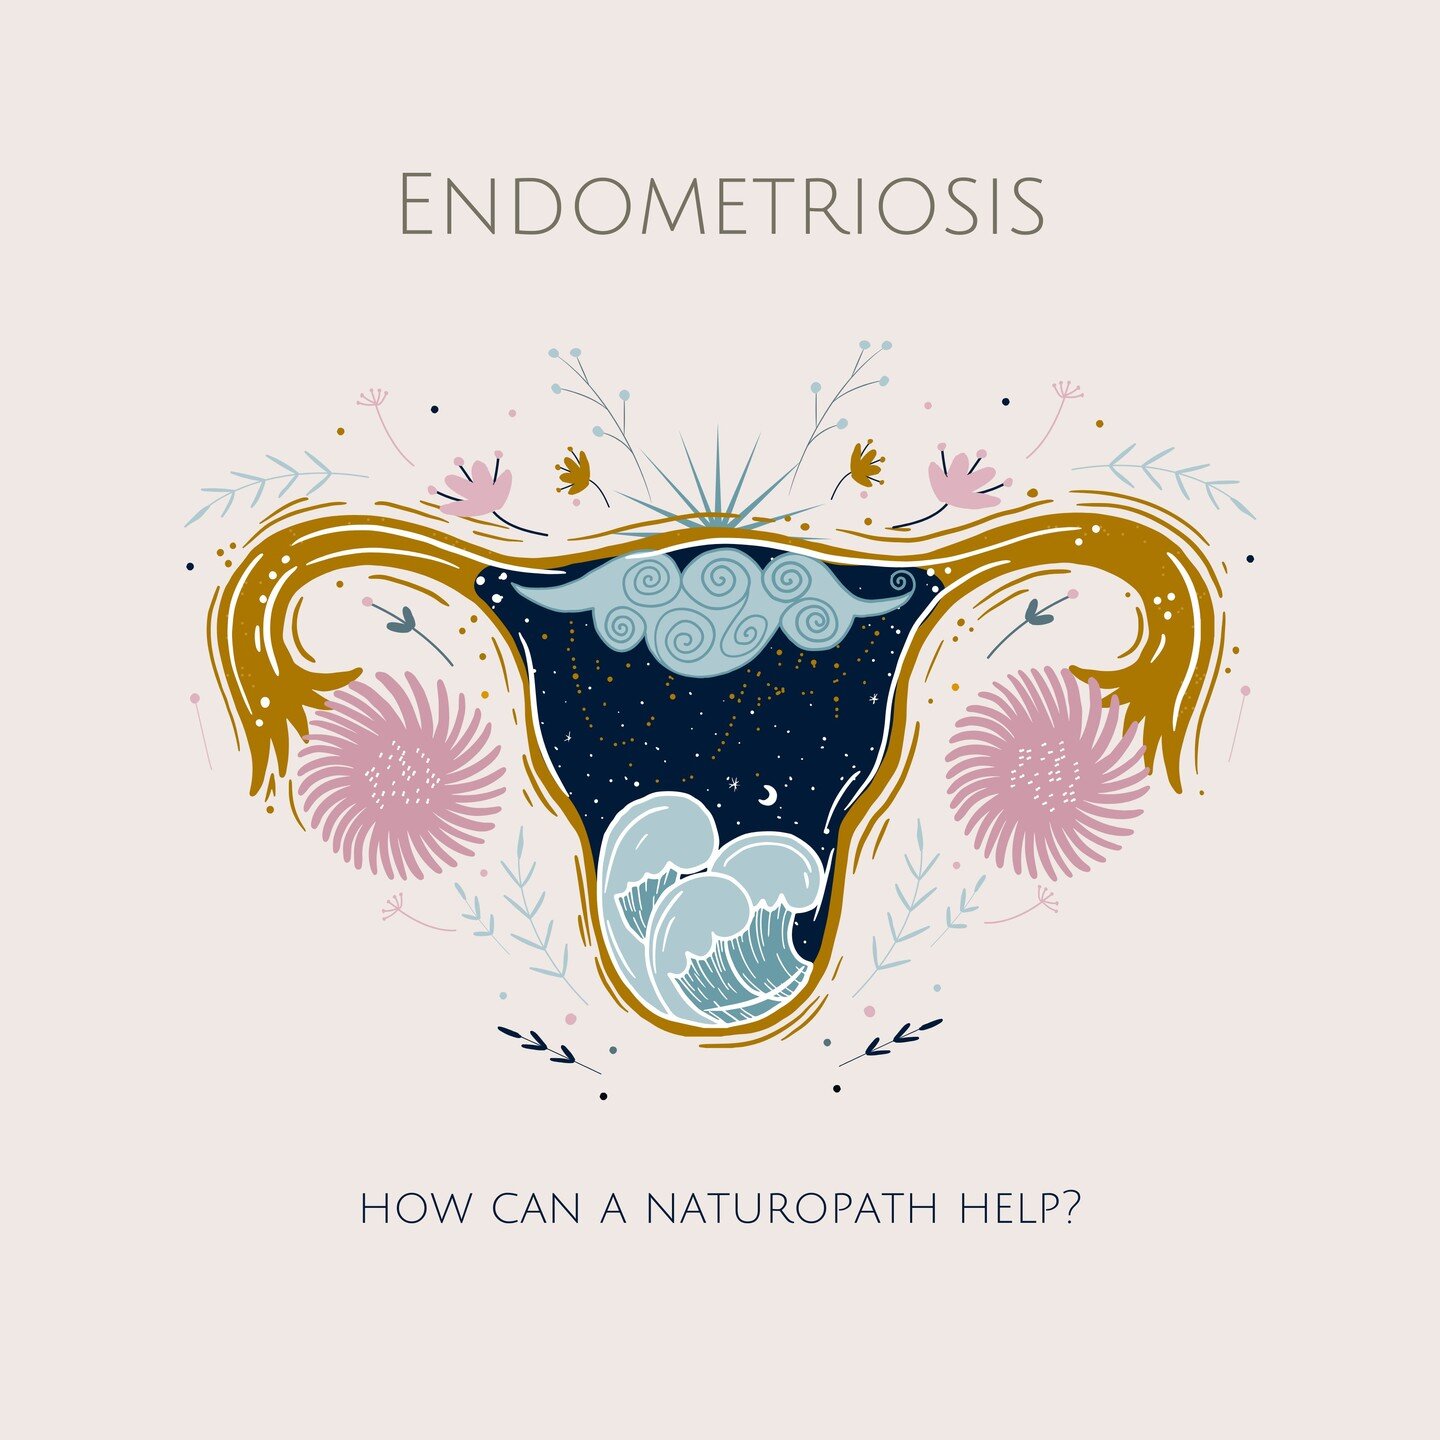 March is Endometriosis Awareness Month so what a great opportunity to share a little about how a Naturopath can help support women with Endo. 

As someone who has suffered debilitating period pain and suspected endometriosis, I empathise heavily with